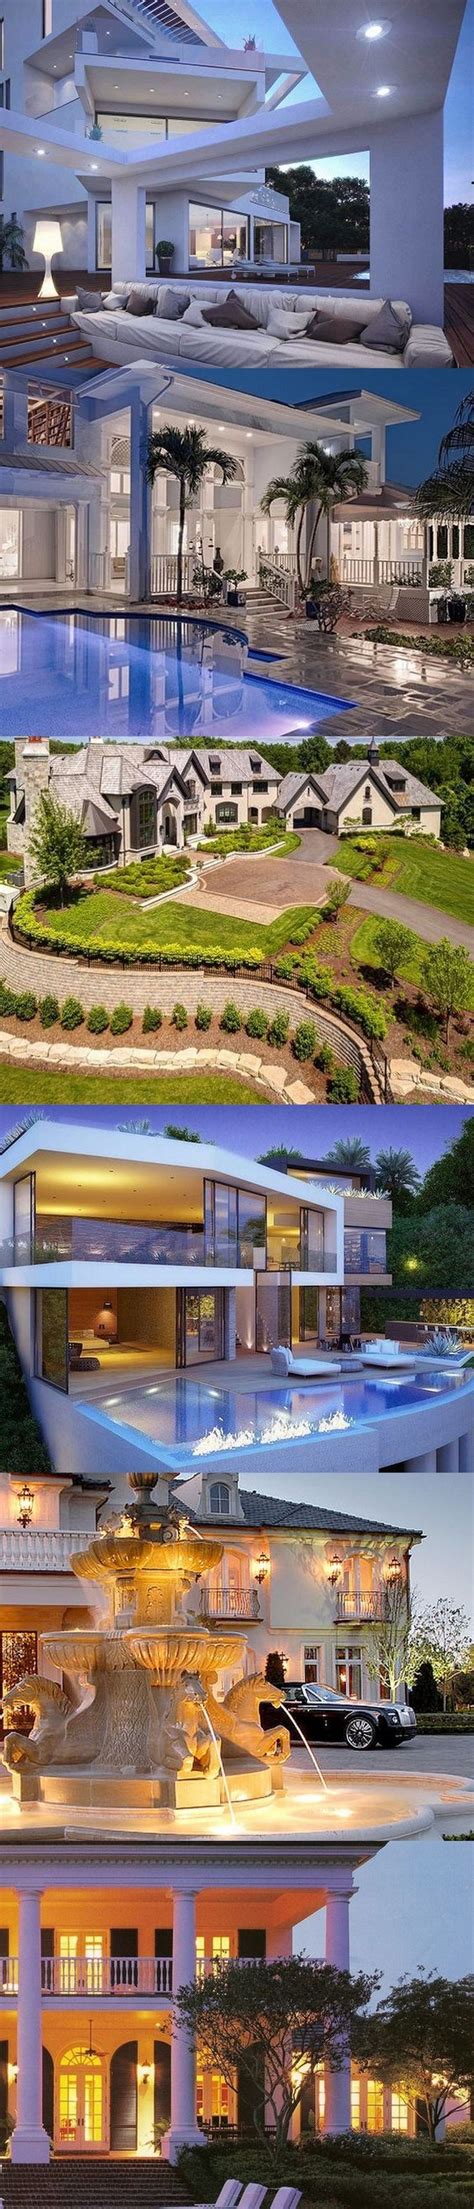 54 Stunning Dream Homes And Mega Mansions From Social Media Home Decor